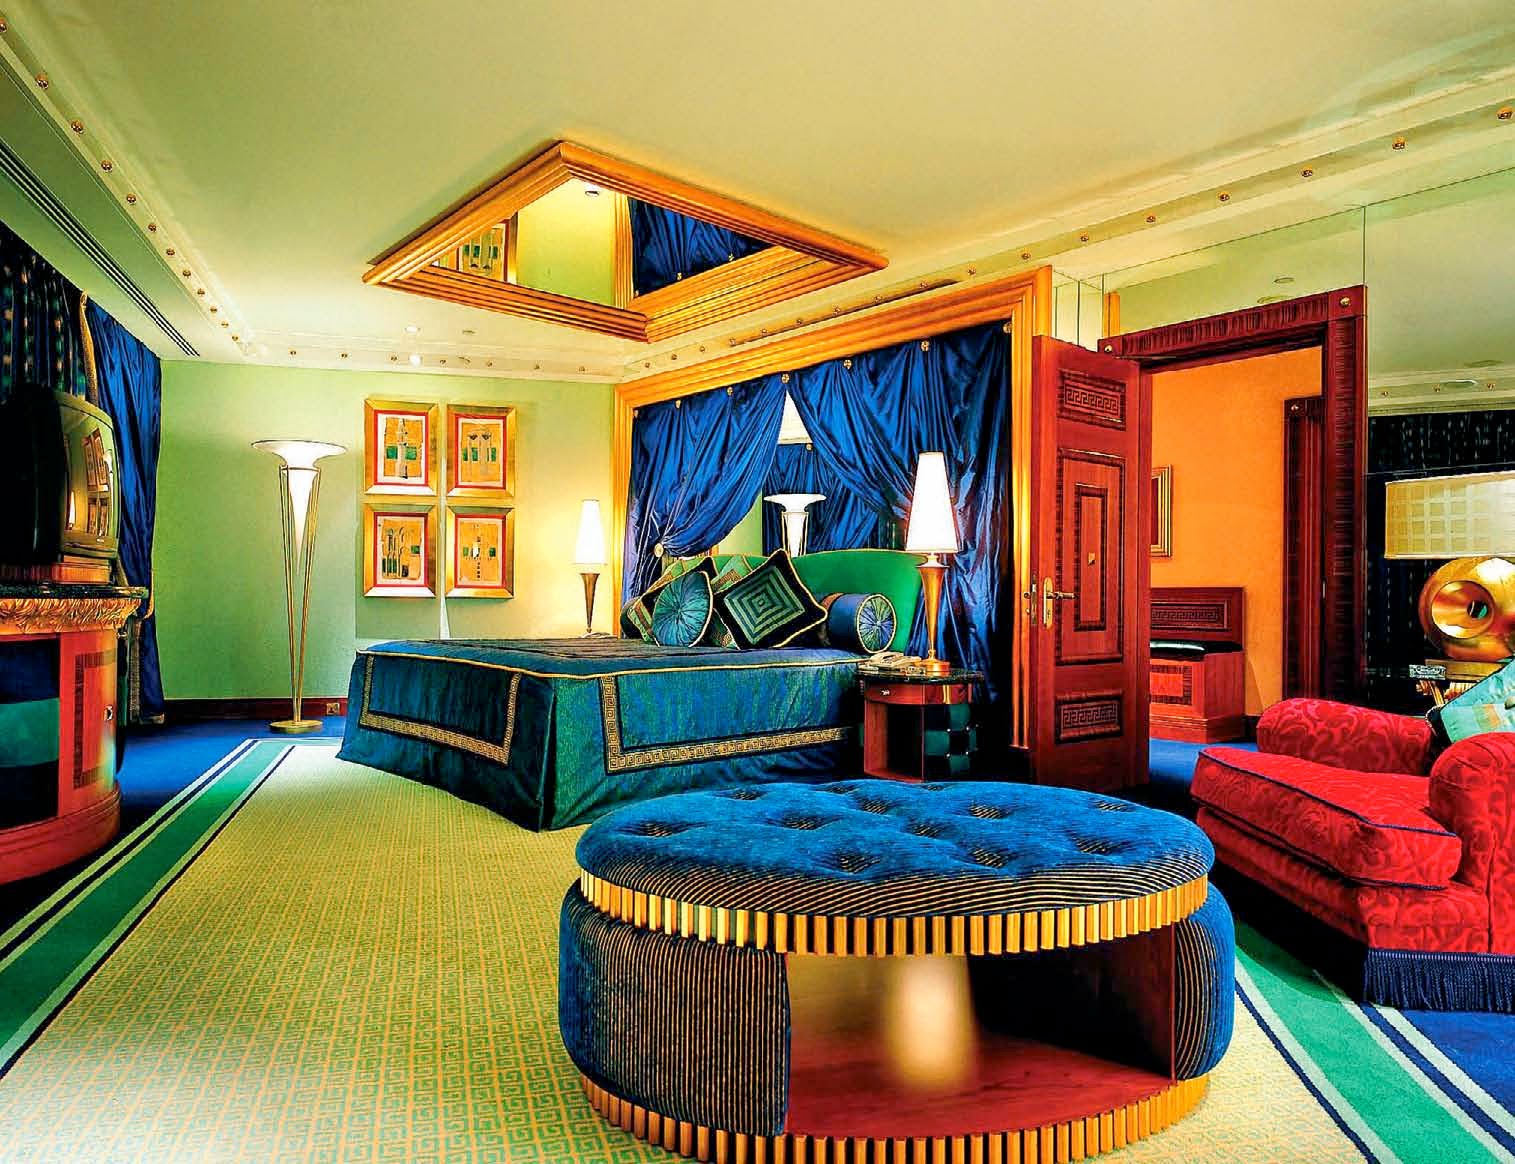 Luxury Hotels In India Worlds Top 10 Expensive Hotel Suites For A World Class Luxury Experience